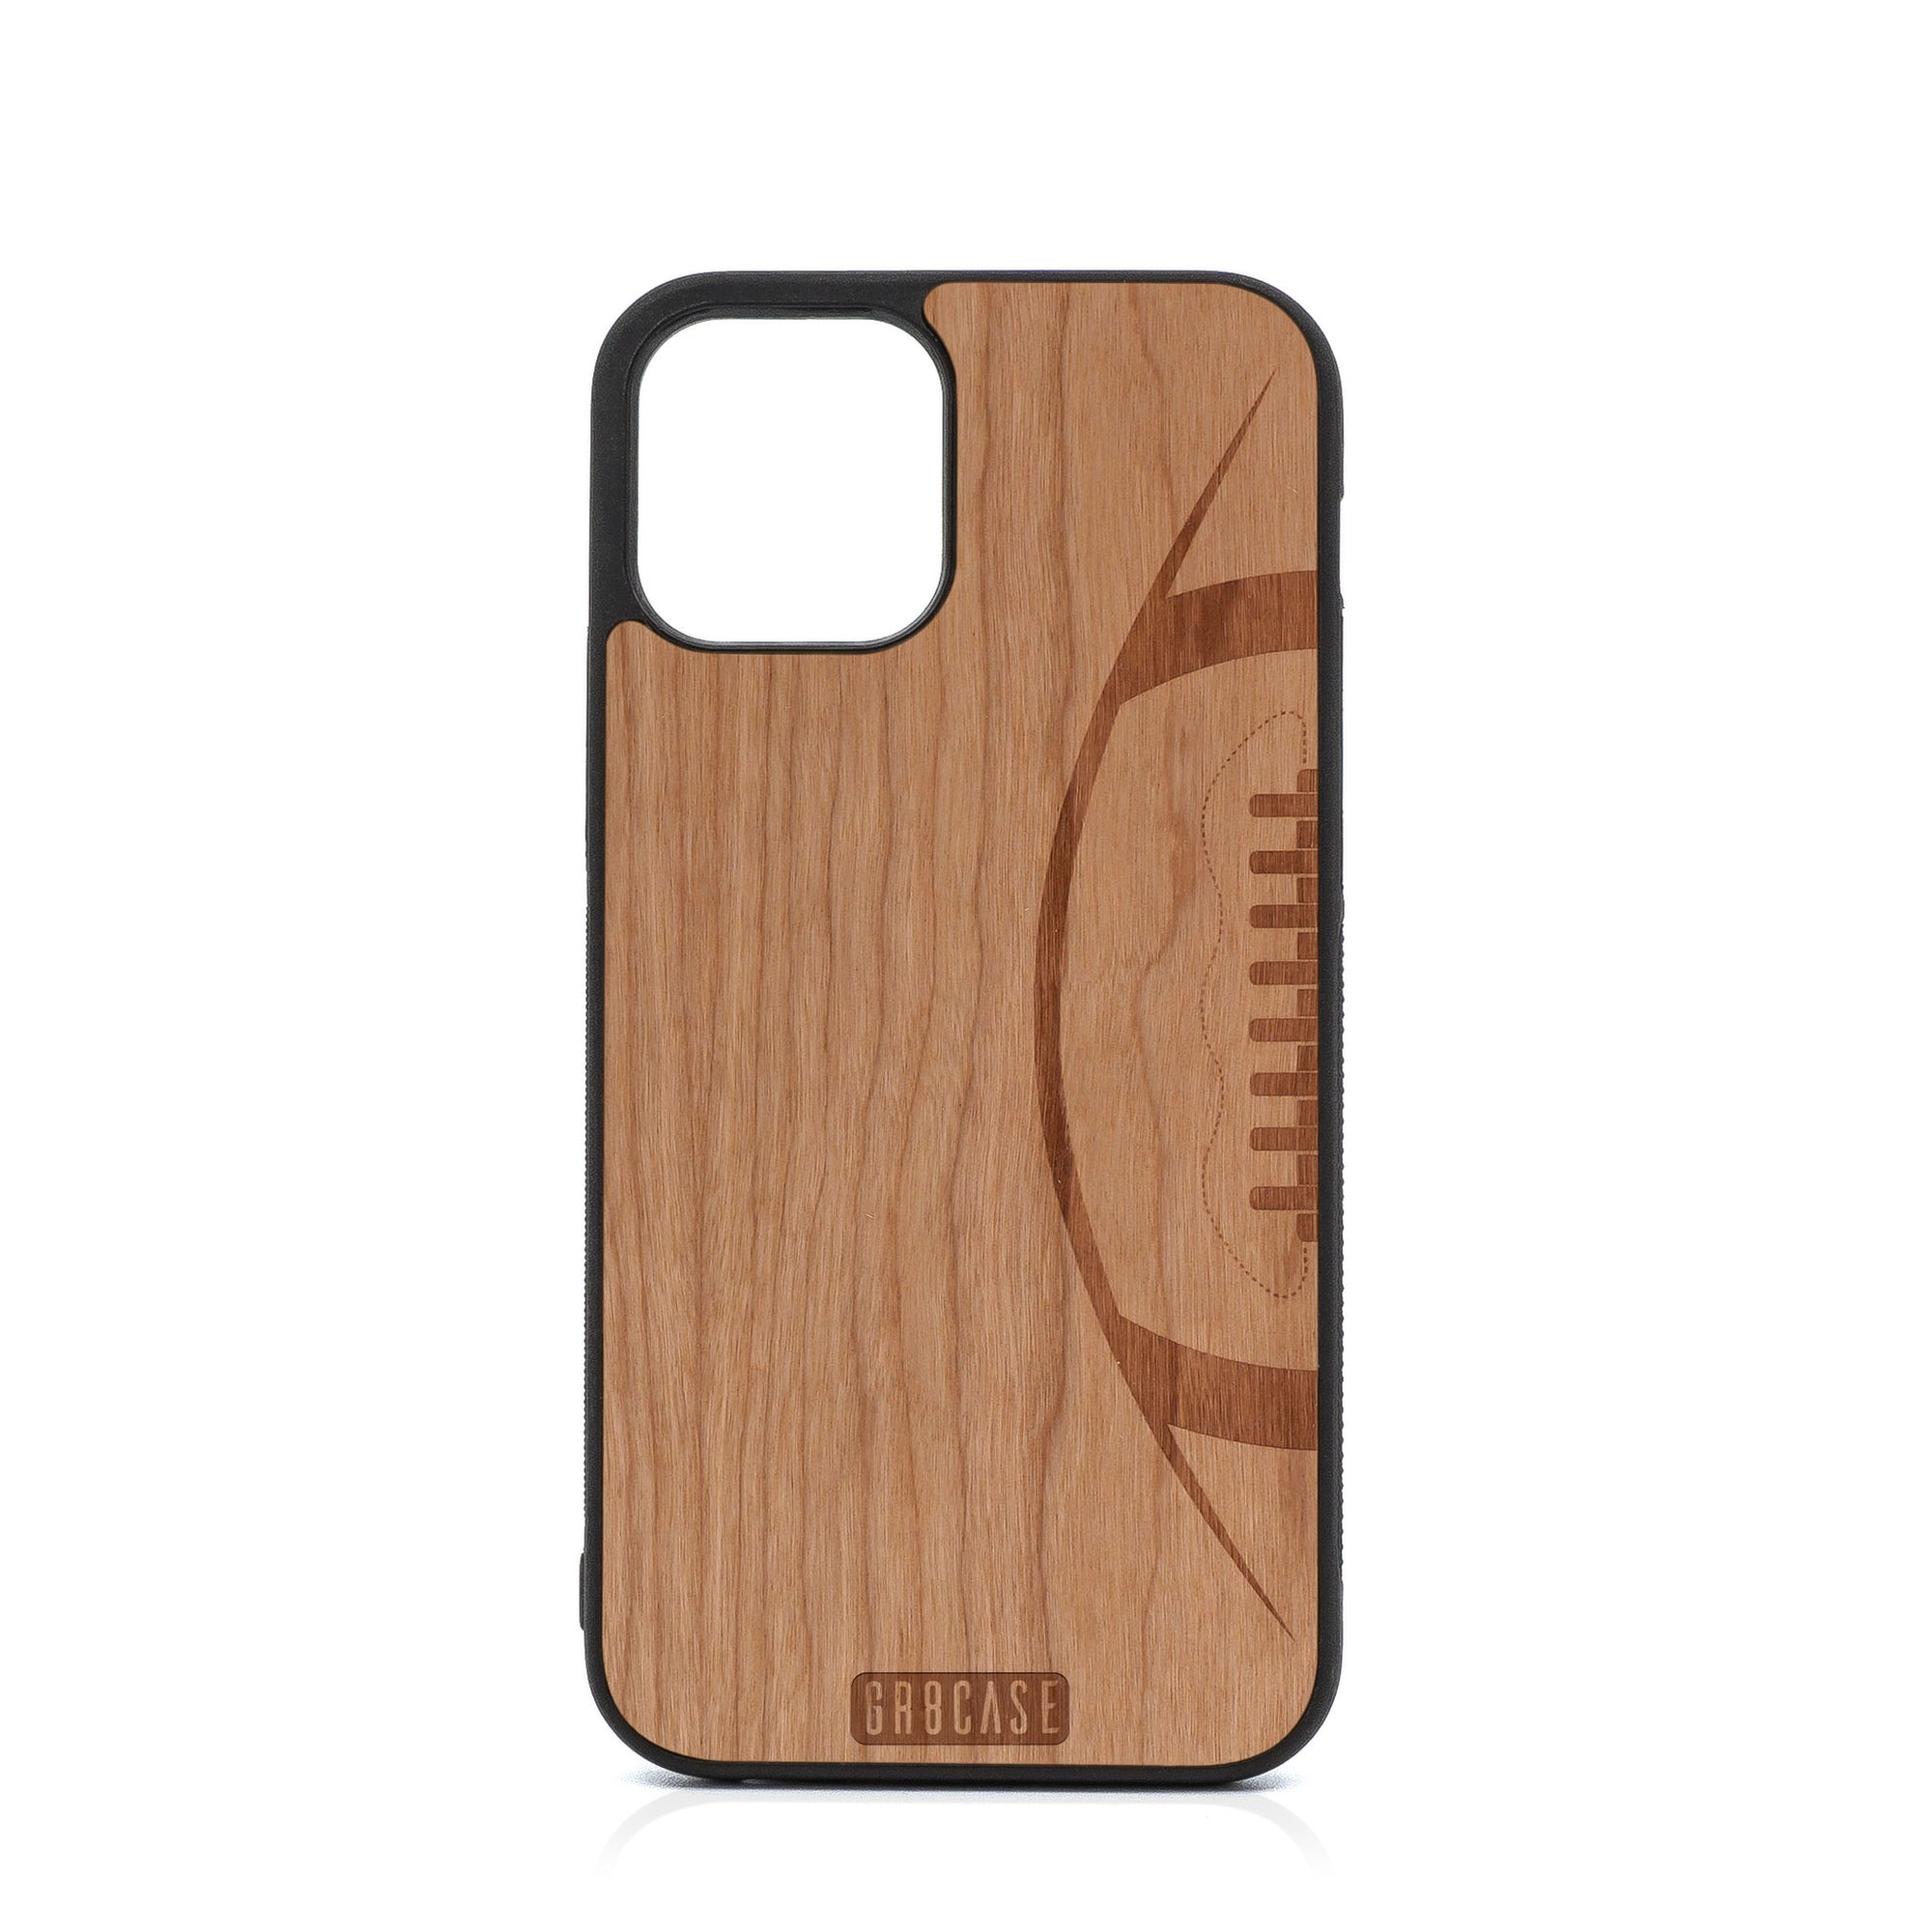 Football Design Wood Case For iPhone 12 Pro